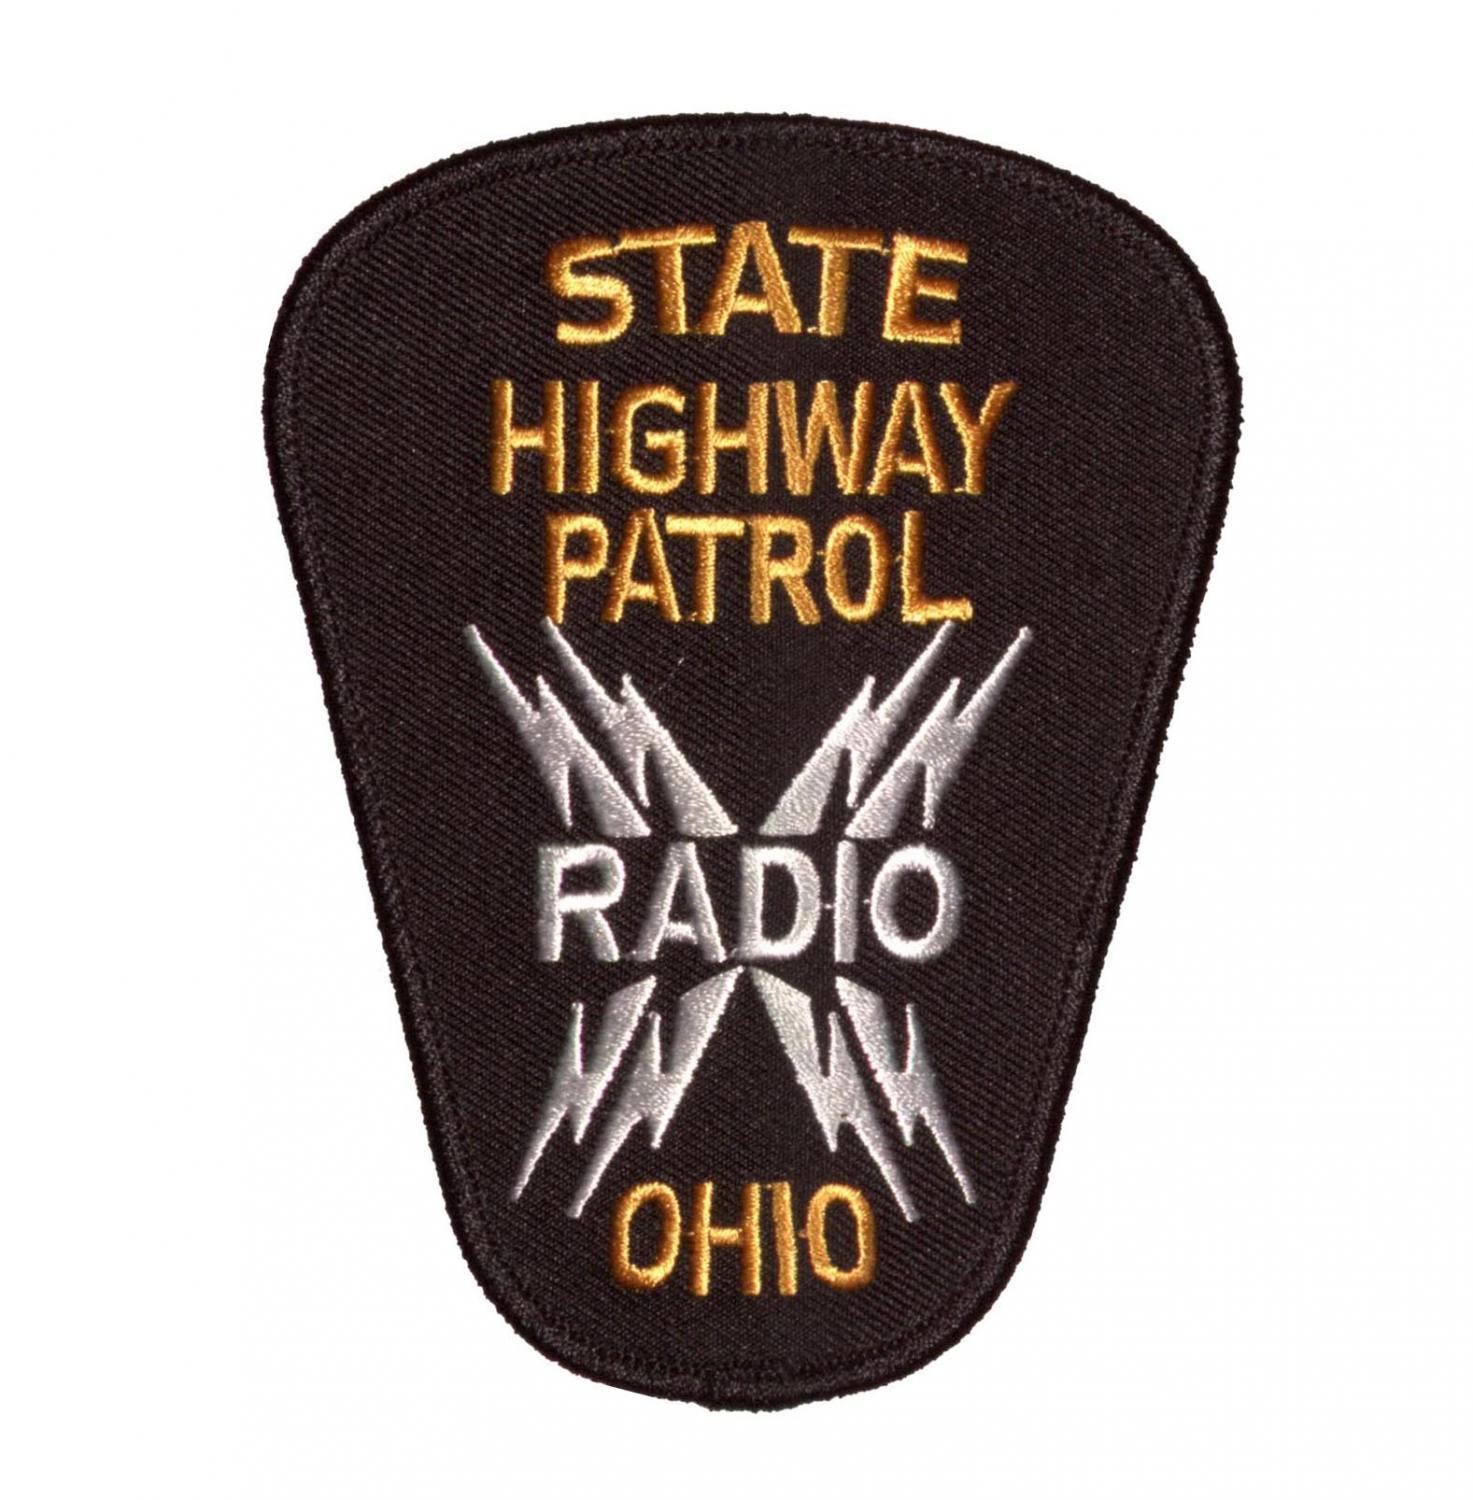 Highway patrol patches